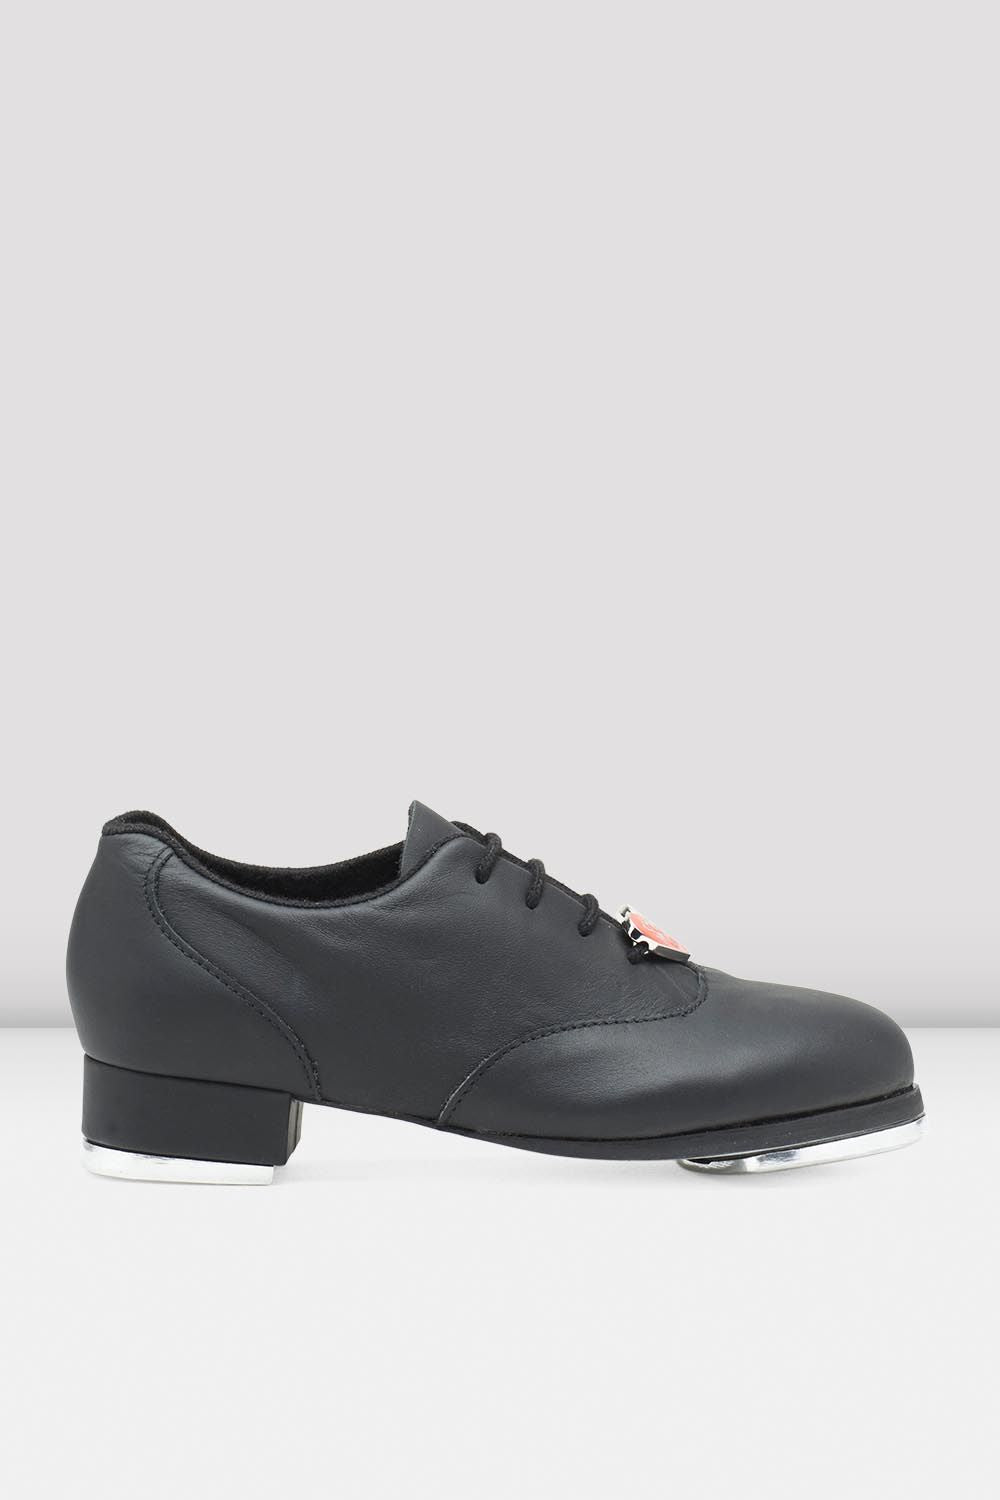 BLOCH Childrens Chloe And Maud Tap Shoes, Black Leather